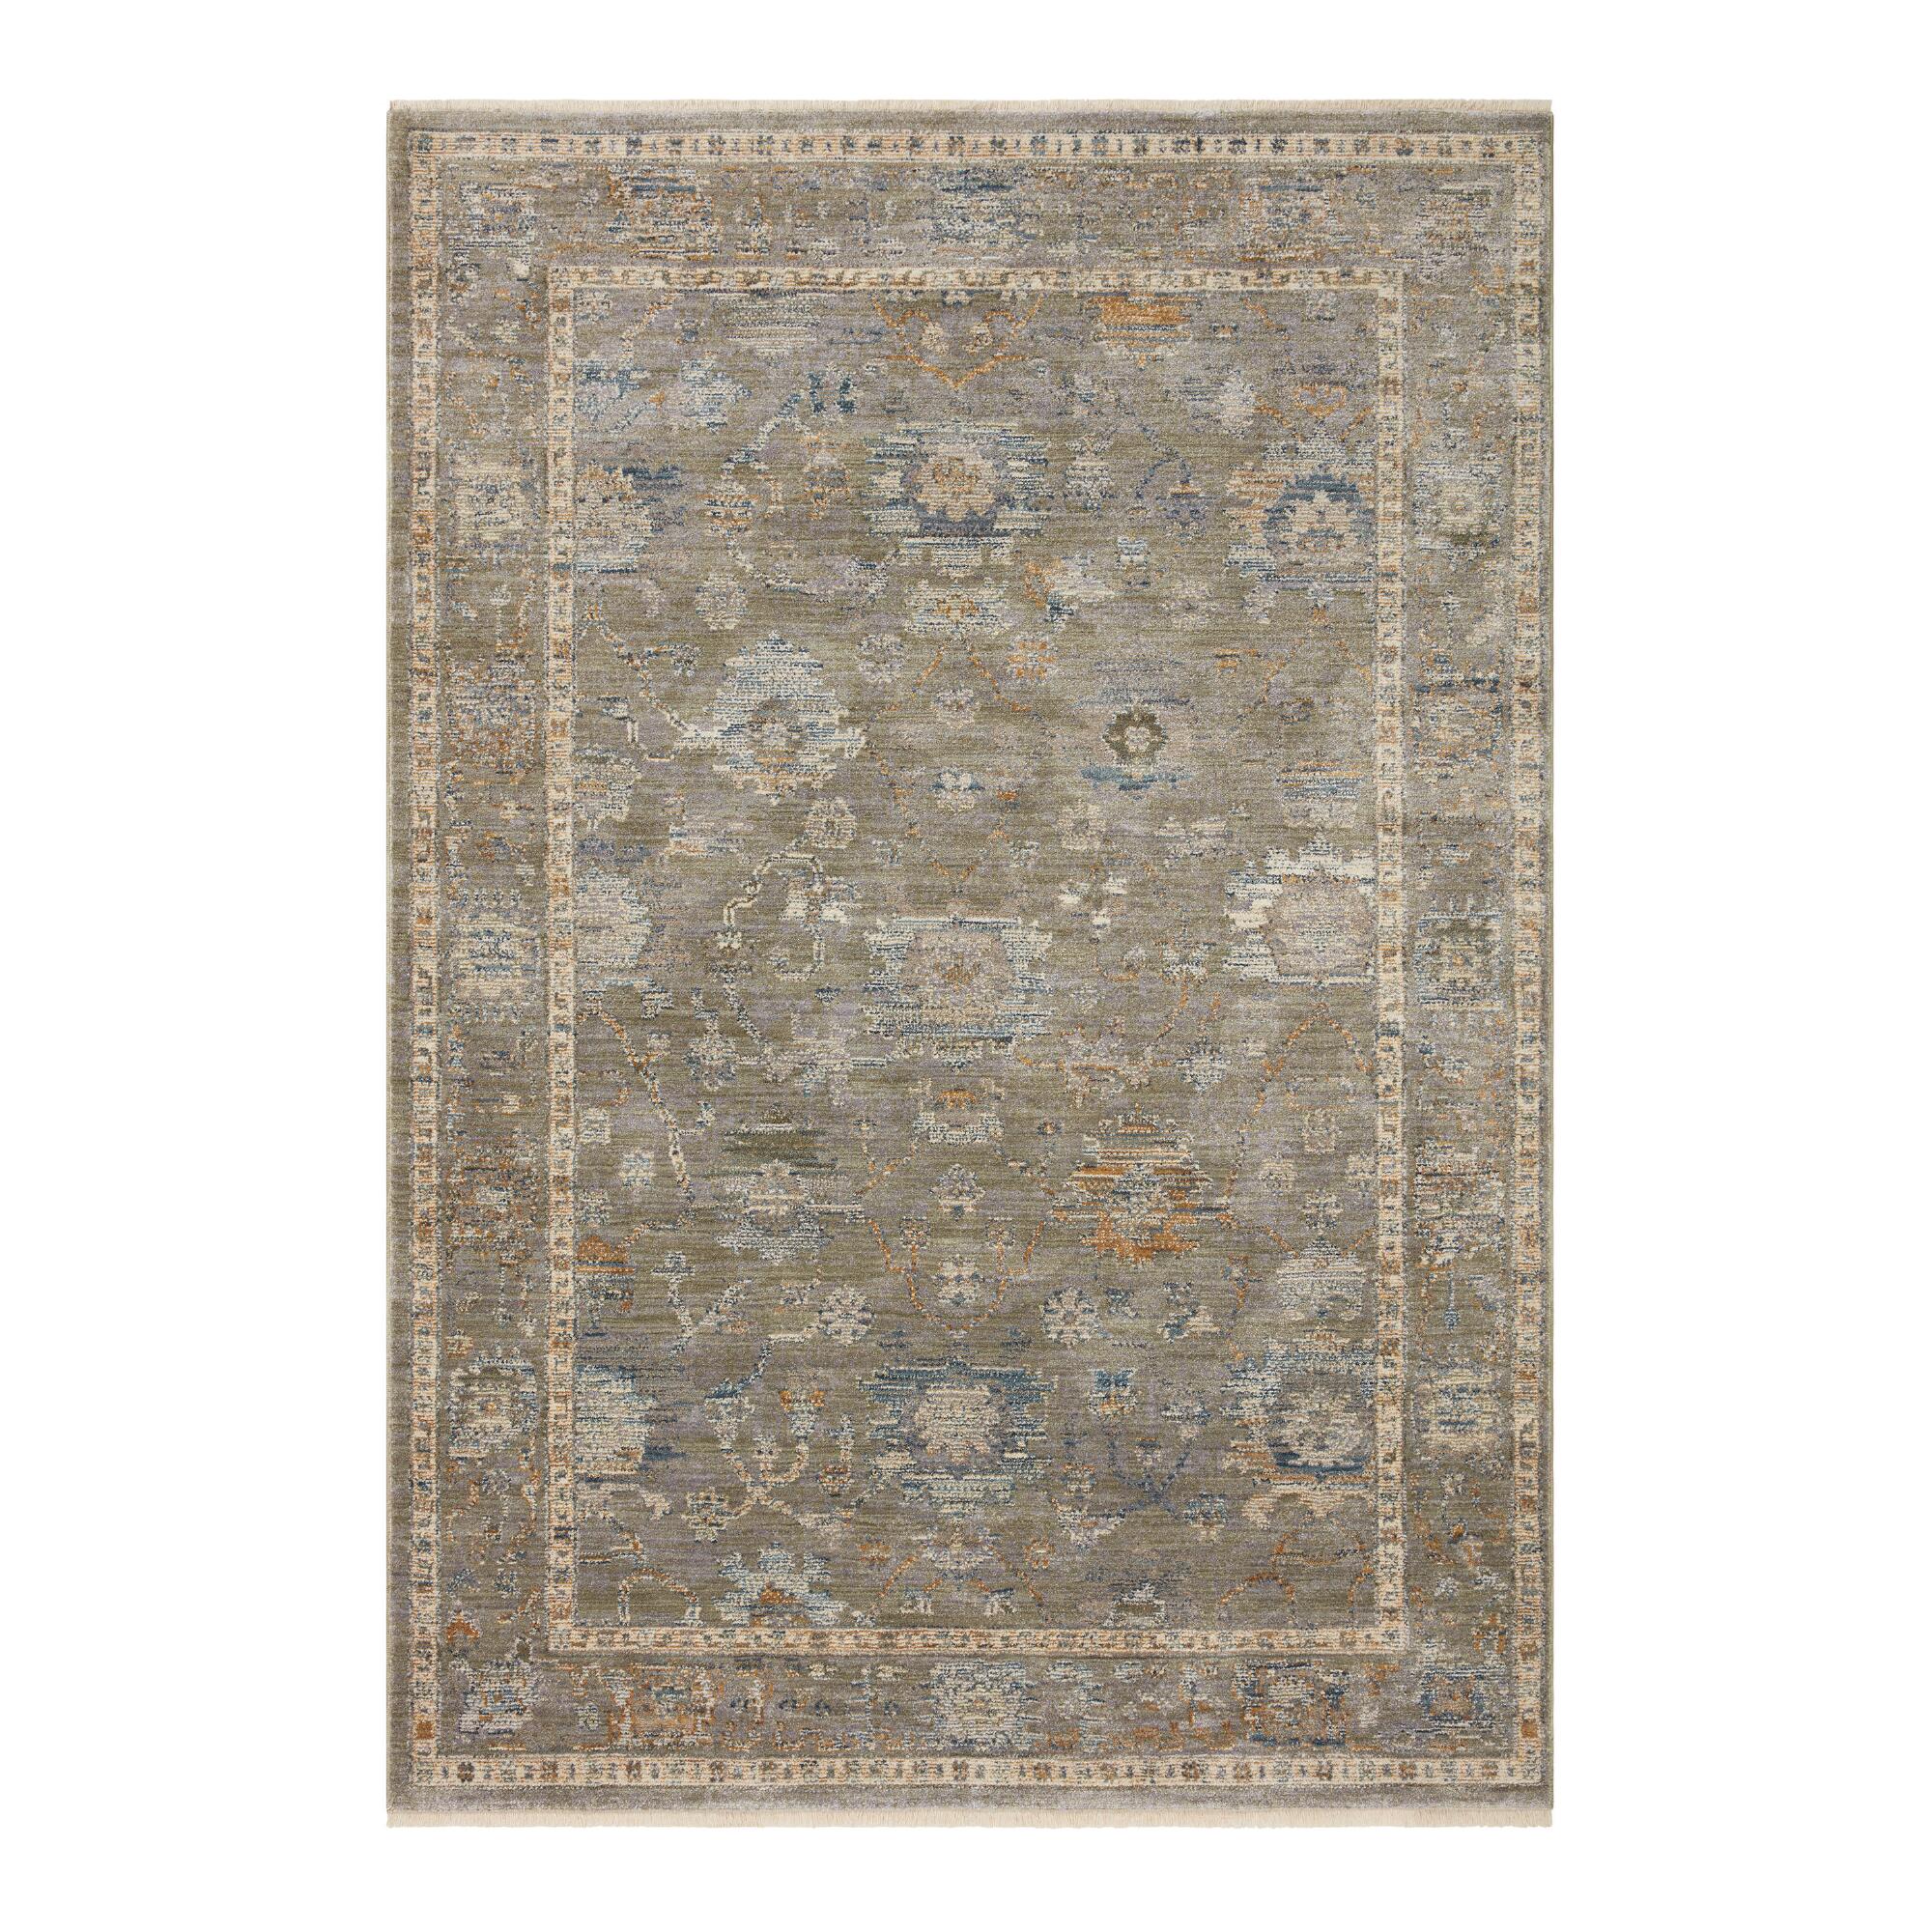 Moss Green Distressed Persian Style Nora Area Rug - Polyester - 6' x 9' by World Market